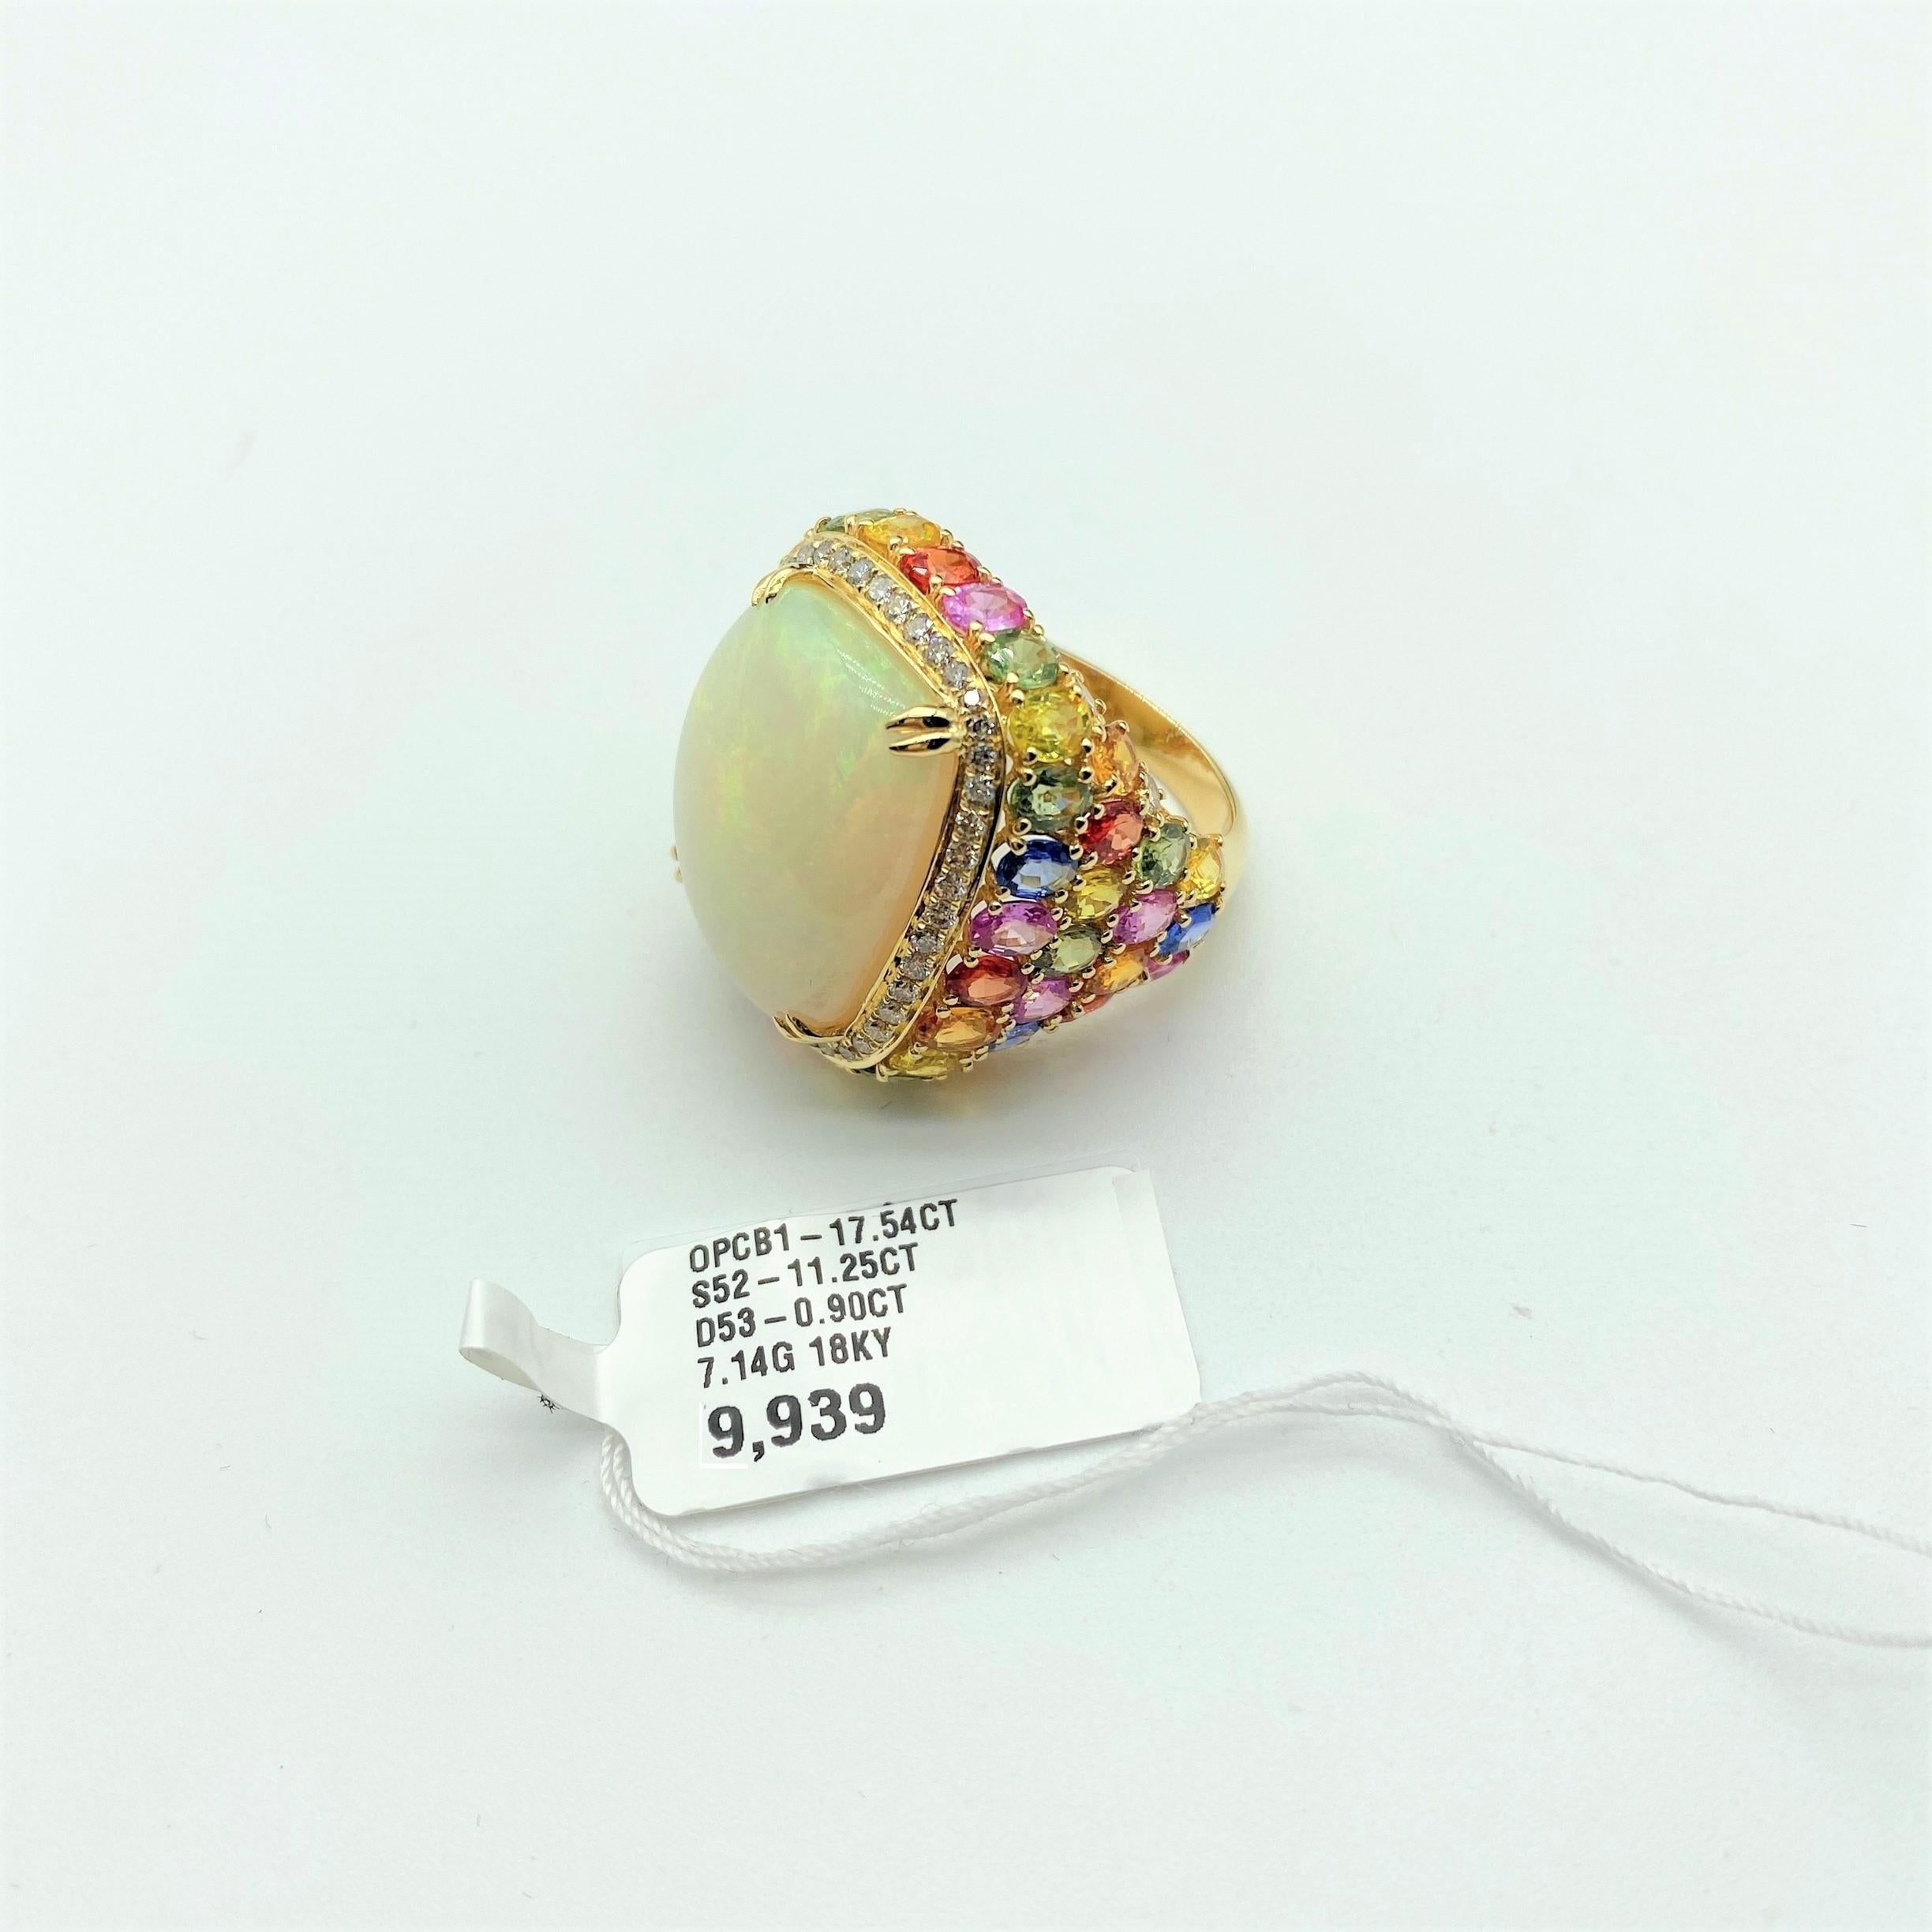 9, 939 Rare 18KT Gold Large Fancy Opal Rainbow Sapphire Diamond Ring In New Condition For Sale In New York, NY